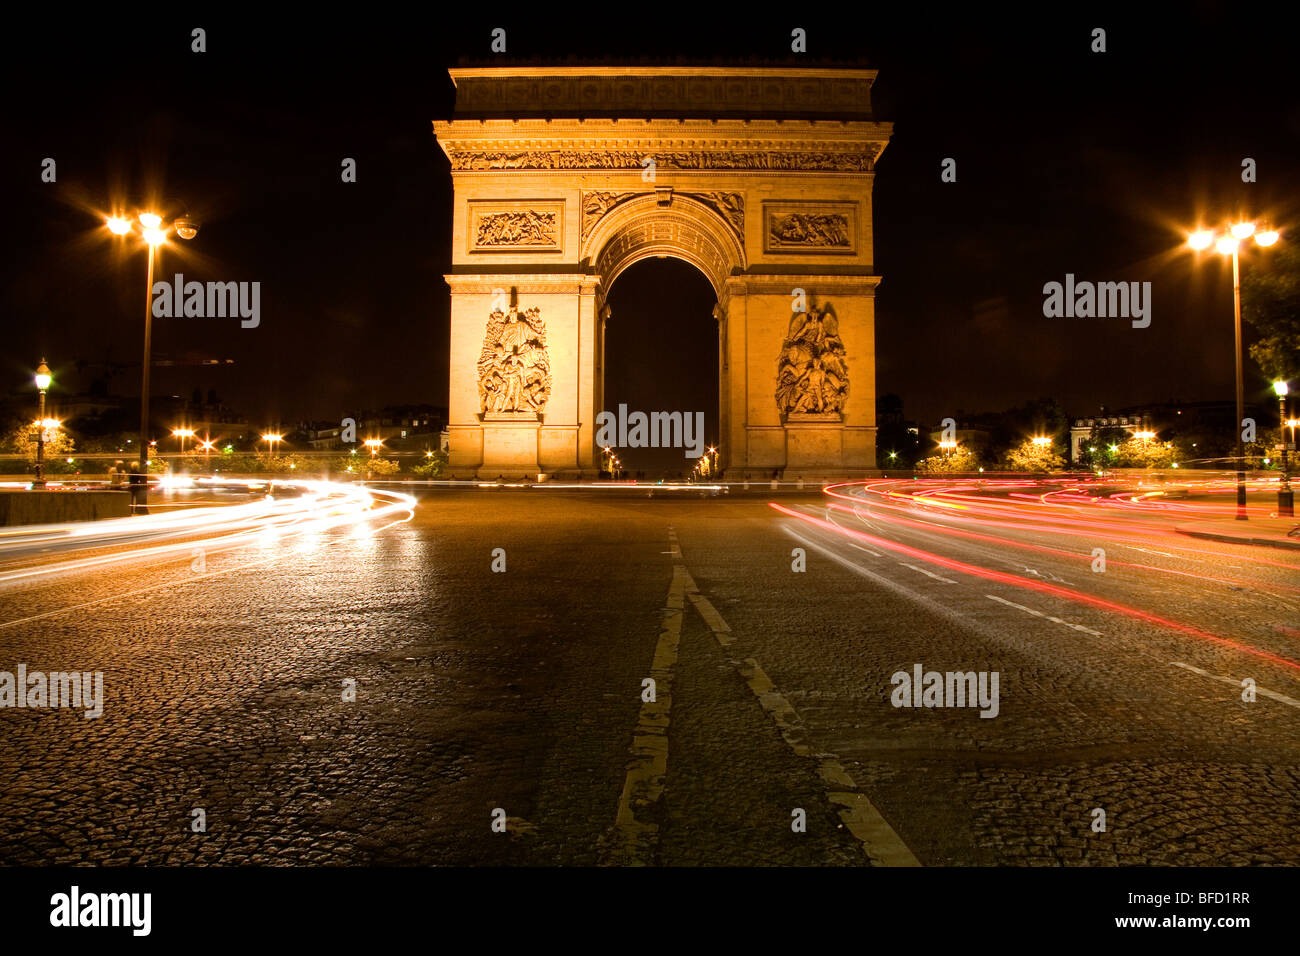 Arc de Triomphe lit at night stands in the centre of the Place Charles de Gaulle, Paris, France. Stock Photo